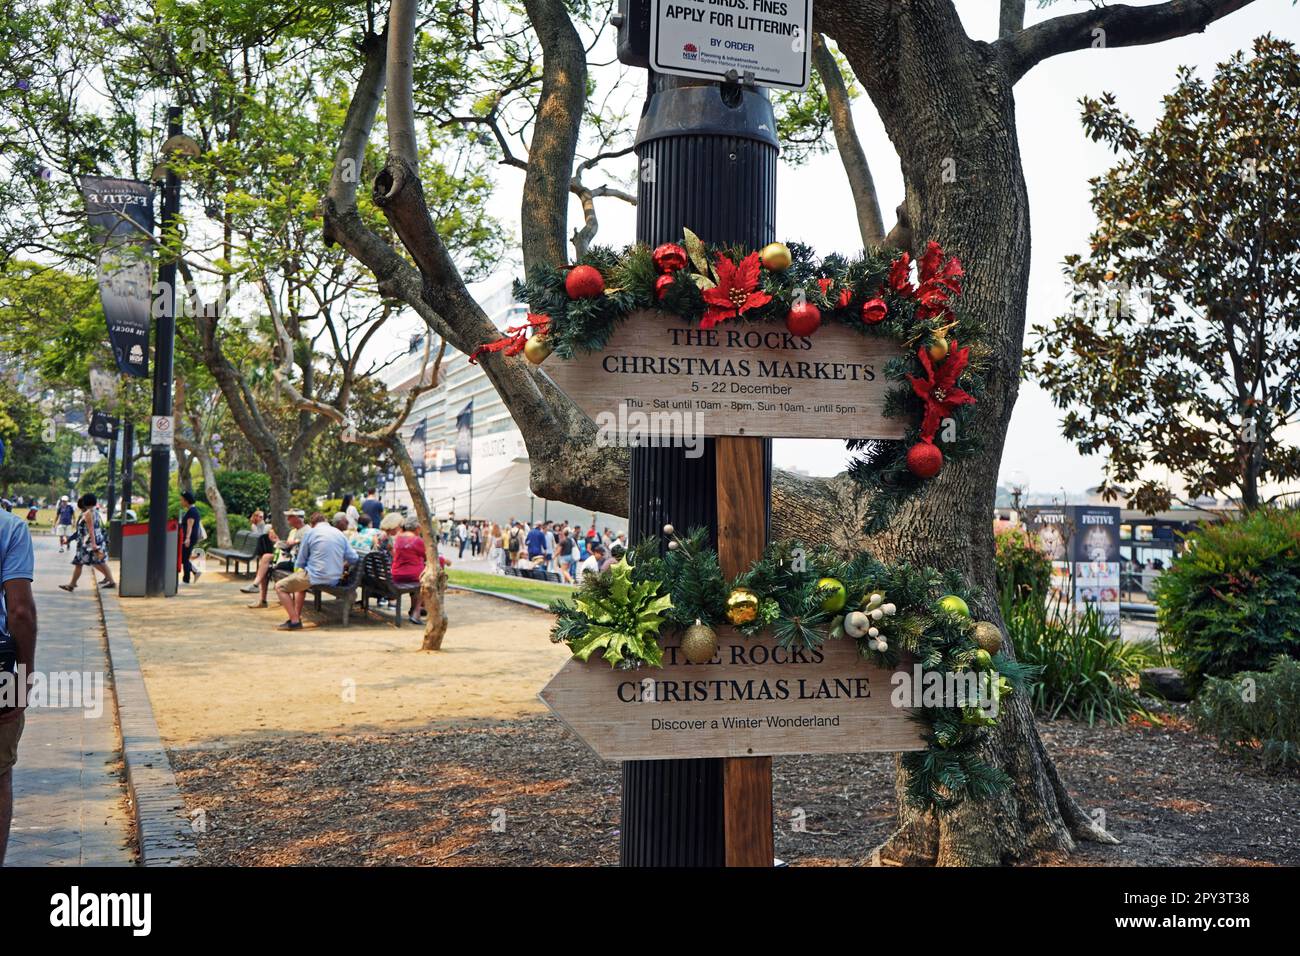 Sydney, NSW / Australia - 14/12/2019: Signs for the Chiristmas markets in The Rocks. Stock Photo